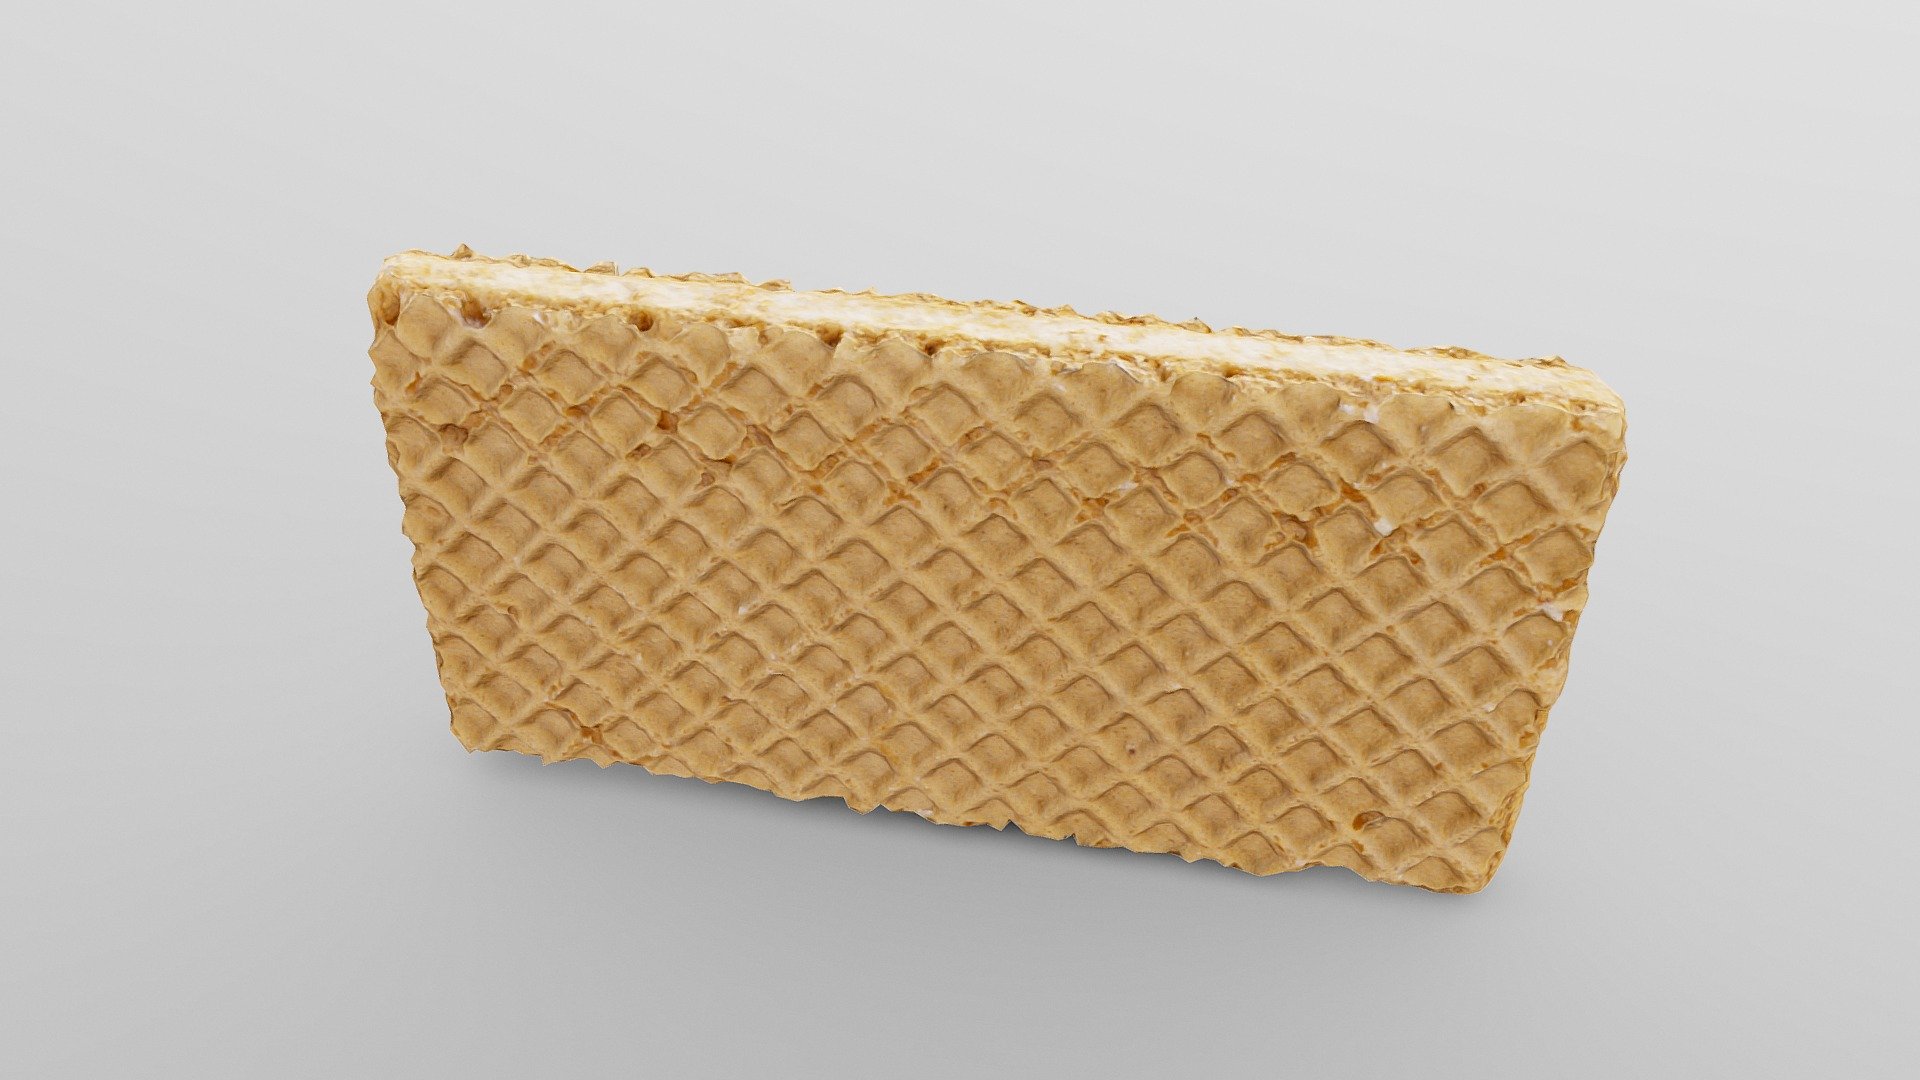 A filled waffle

9.4 x 5.0 x 1.0 cm

The highly optimized, photorealistic model was created using custom photogrammetry techniques. This involves capturing hundreds of pictures from many angles and under different lighting conditions. The resulting data is then processed with manual and automated pipelines, by leveraging RawTherapee, Metashape, Blender and self-developed software.

The attached ZIP archive includes the low-poly OBJ mesh, a Blender file and a set of JPEG textures at 4k resolution.

If you want access to the high-poly mesh or raw texture files, you can contact me personally at flolu.de 3d model